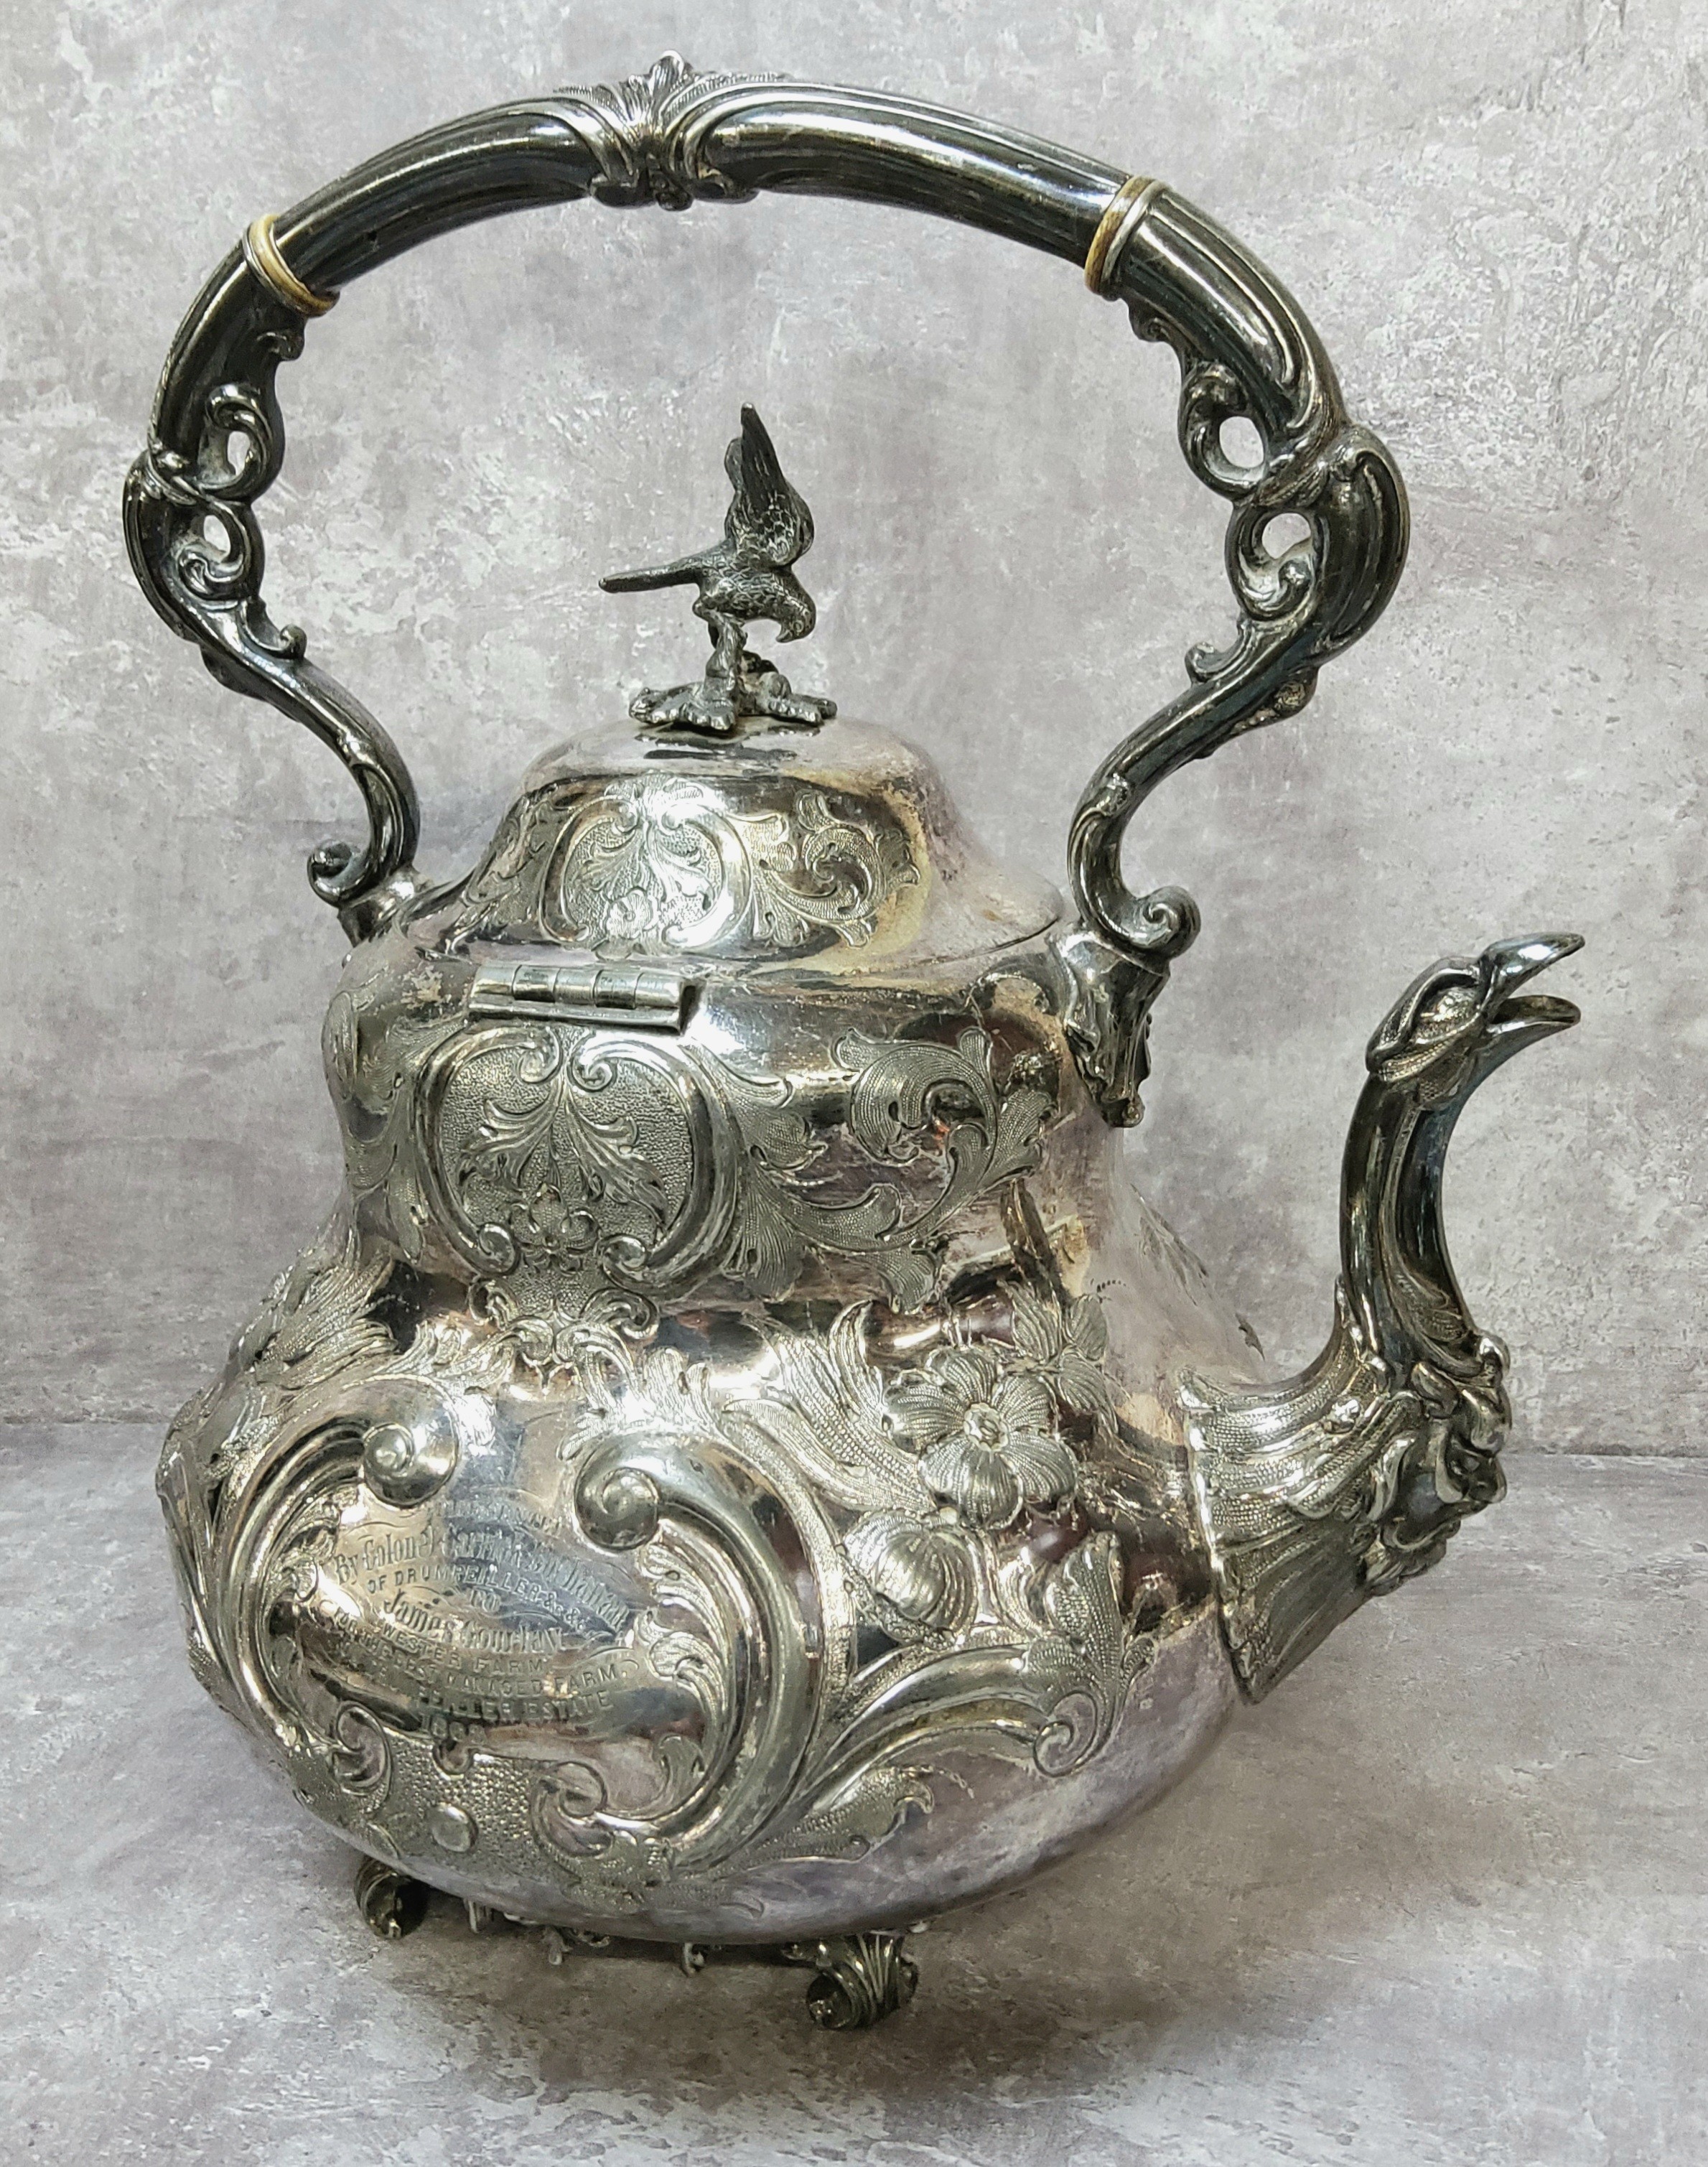 Scottish Interest - An Old Sheffield plate tea kettle, 'Presented by Colonel Carrick Buchanan to